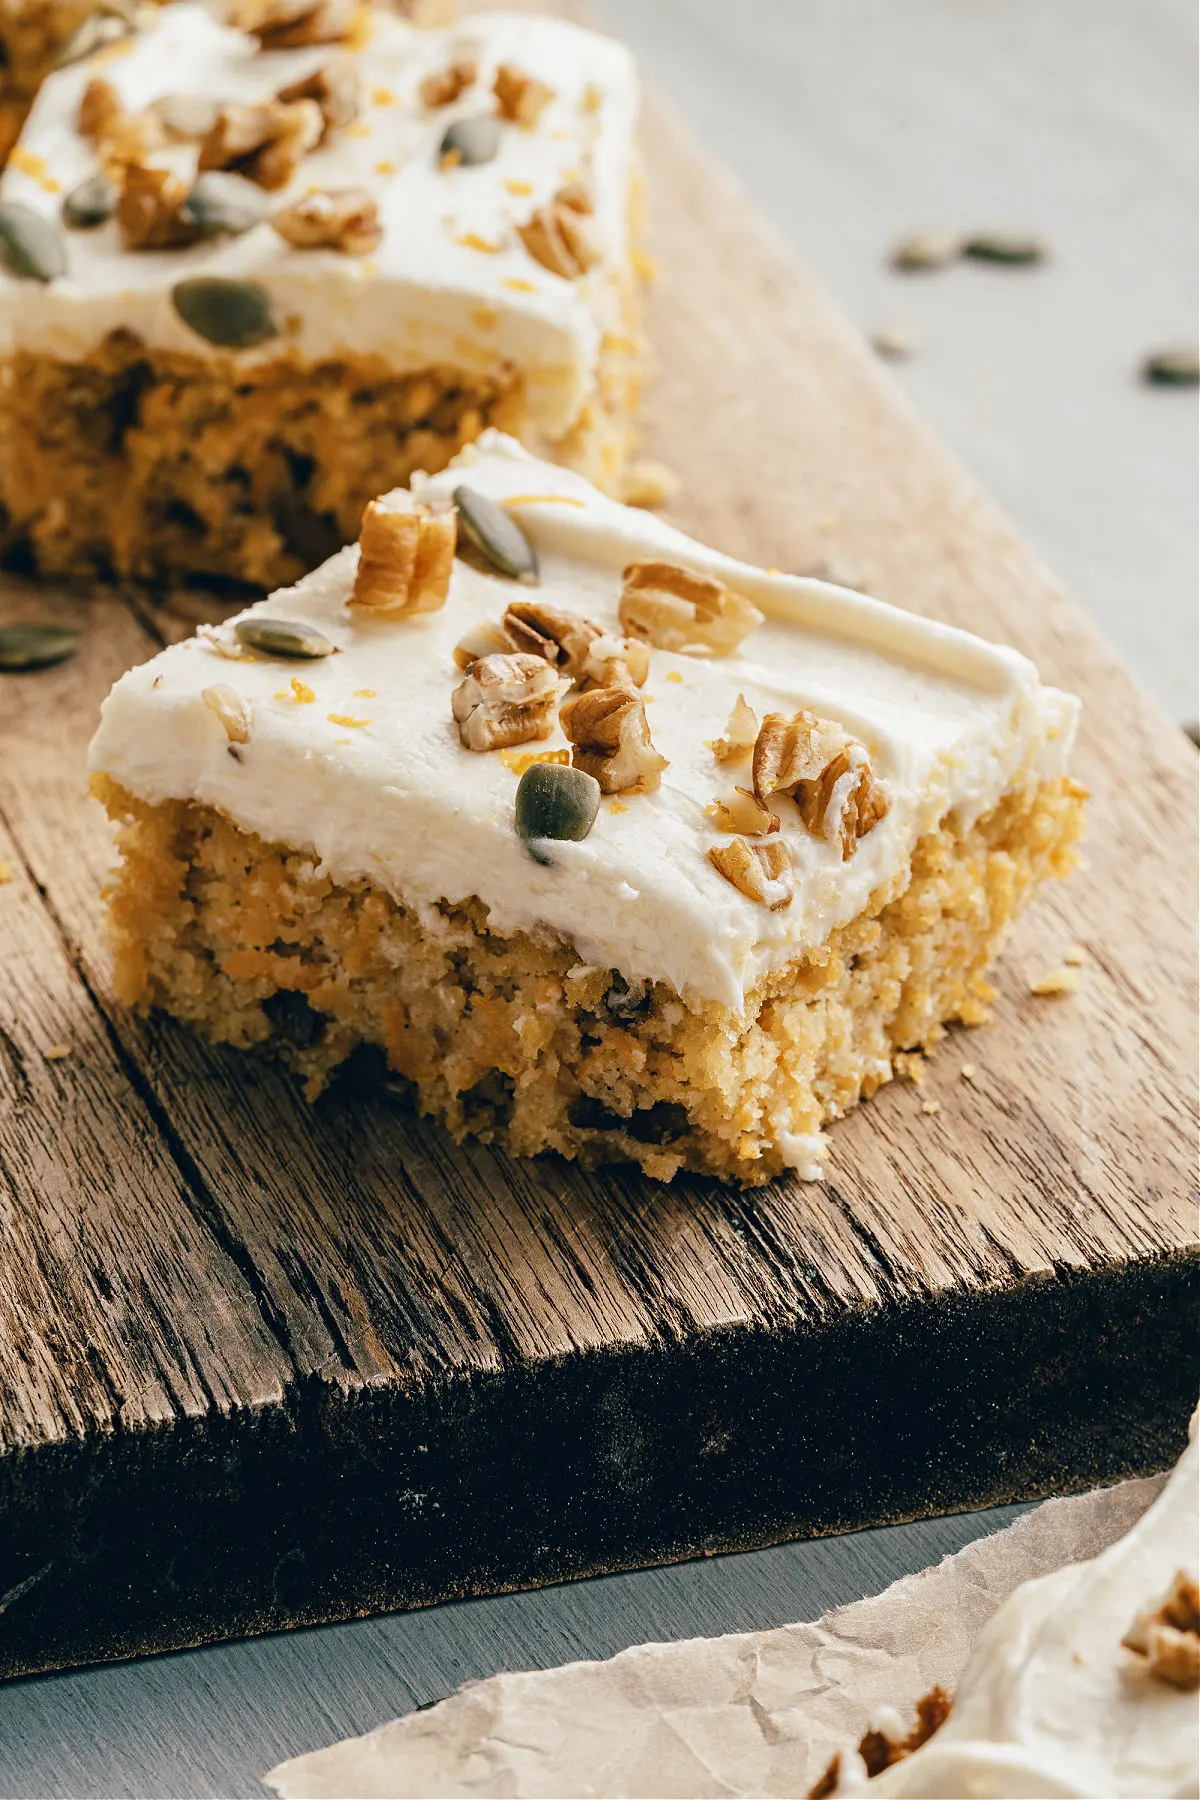 The Best Carrot Cake Recipe In The World Ever(Video) - Next Level!